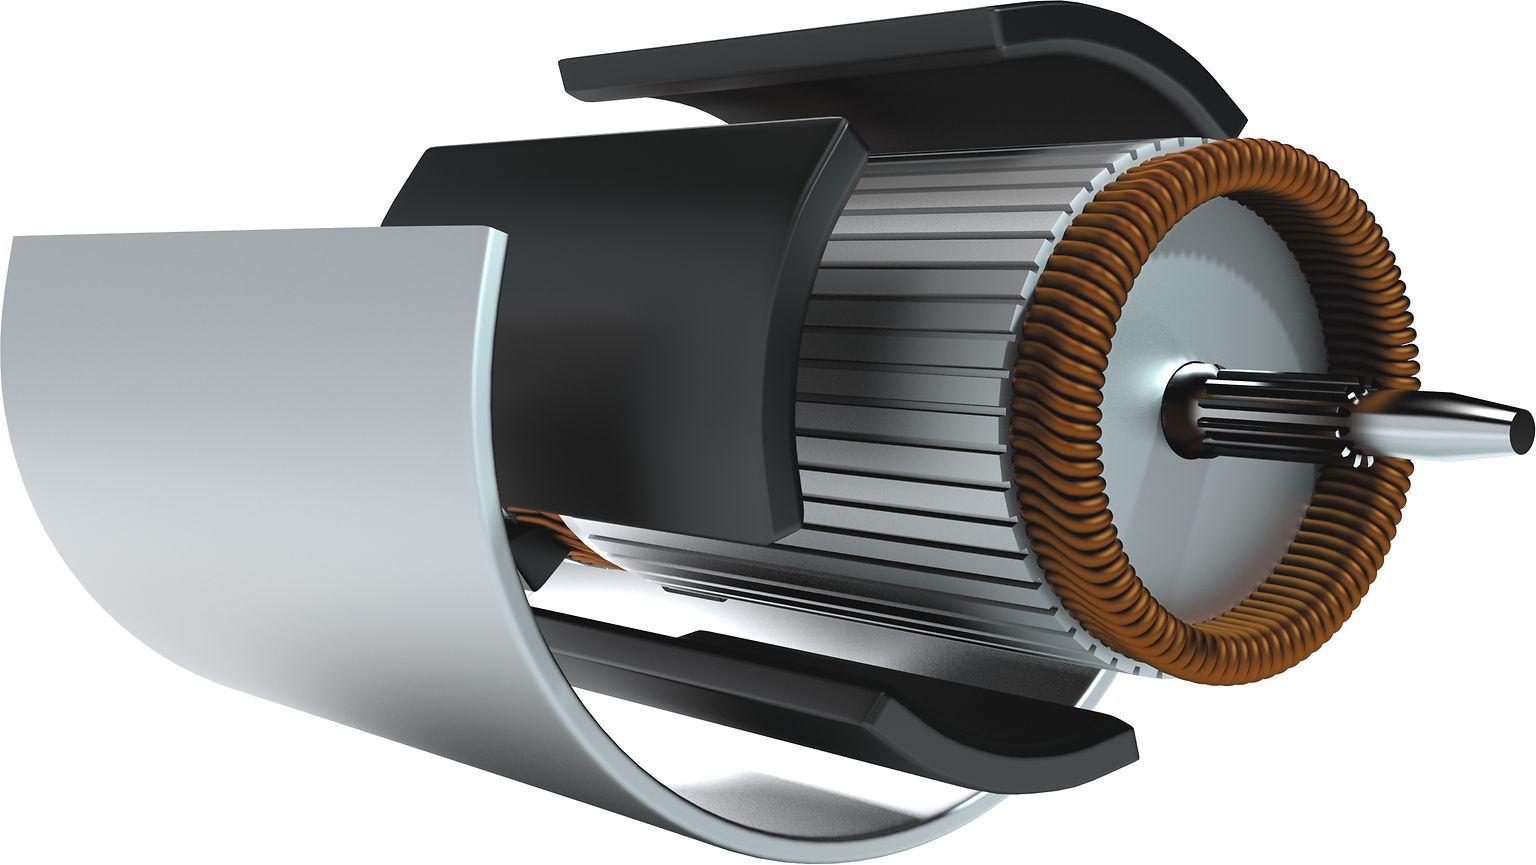 Henkel develops tailor-made solutions for various applications in electric motors through close cooperation with its customers